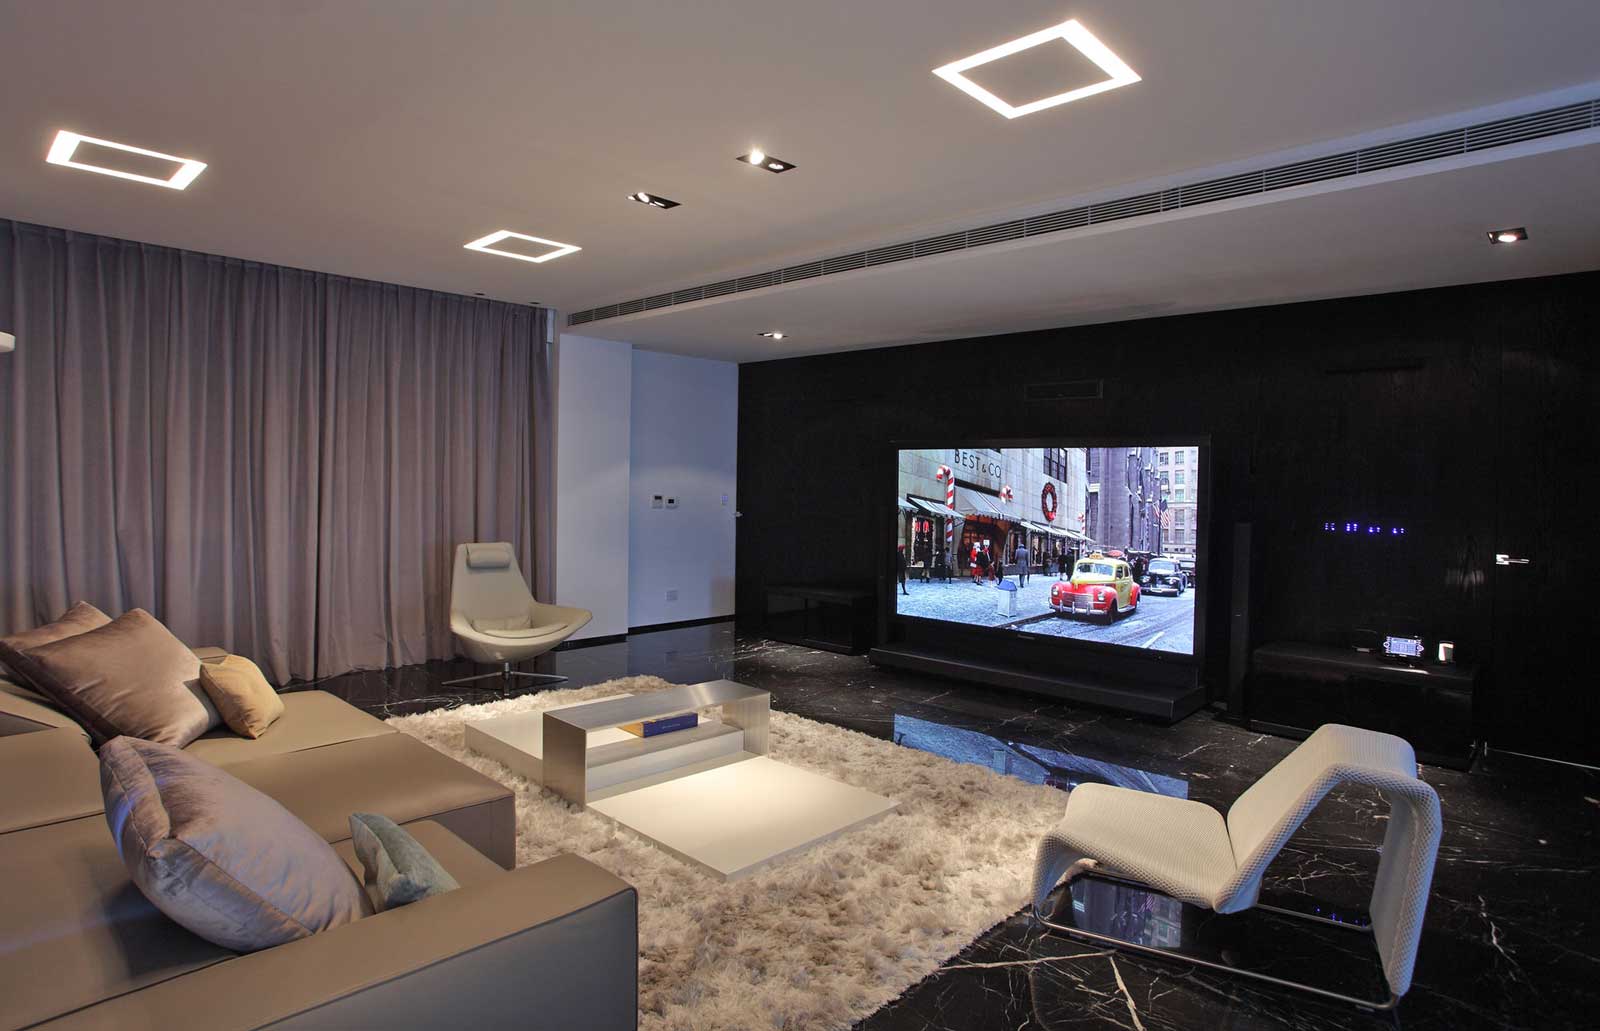 Living Room Ideas Mesmerizing Living Room Theater Decorating Ideas For Small House Design With Adorable Cream Living Couch Idea And Modern Grey Ceiling Design Also Beautiful Floor Curtain Ideas Living Room 20 Stylish Living Room Theater For The Beautiful Media Rooms